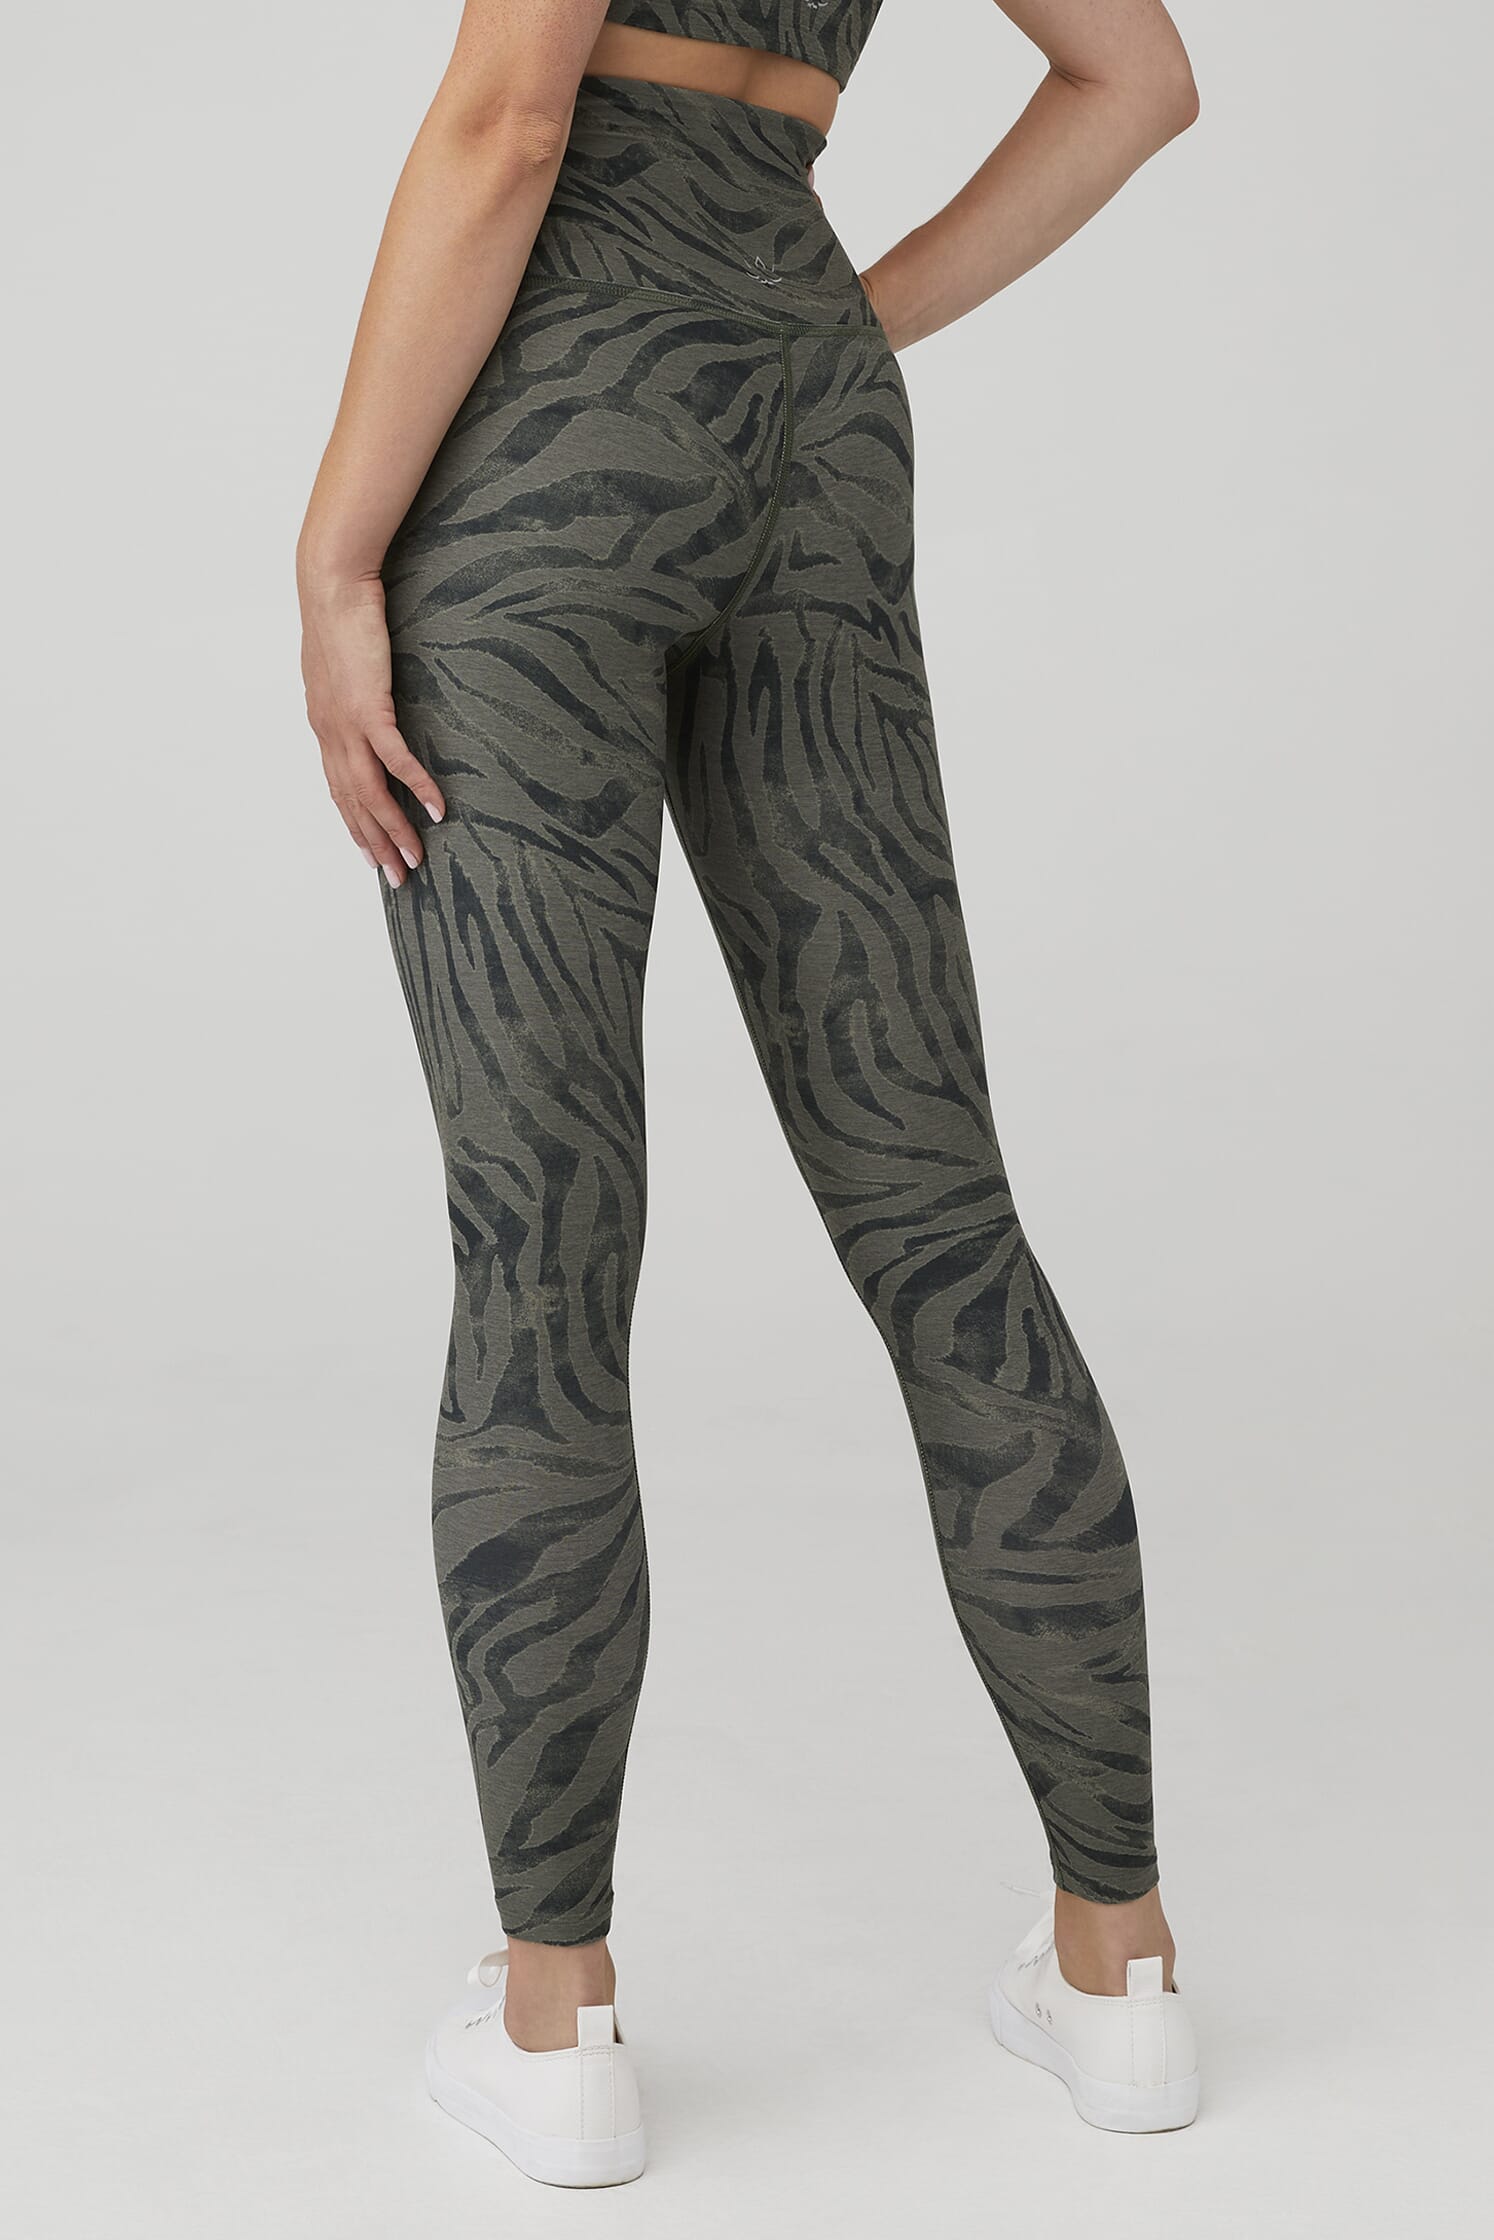 Beyond Yoga Spacedye Caught in the Midi High Waisted Legging in